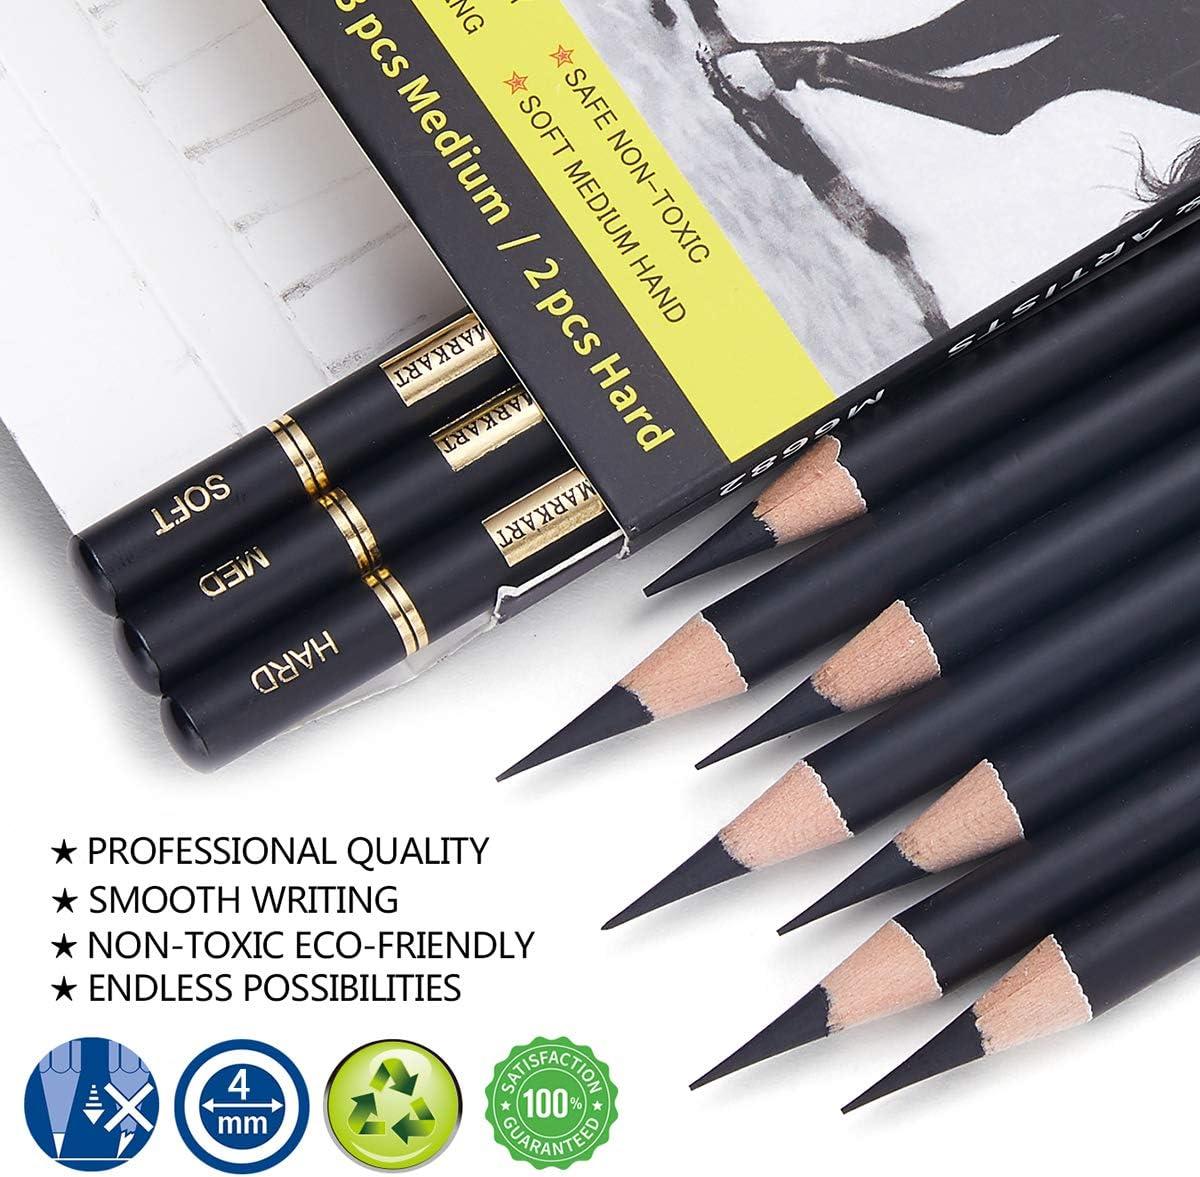 My Art Tools Sketch Pencils for Drawing and Shading - 10pcs Art Sets Each with Sketching Pencils for All Professional Artists - Dual Pack Charcoal